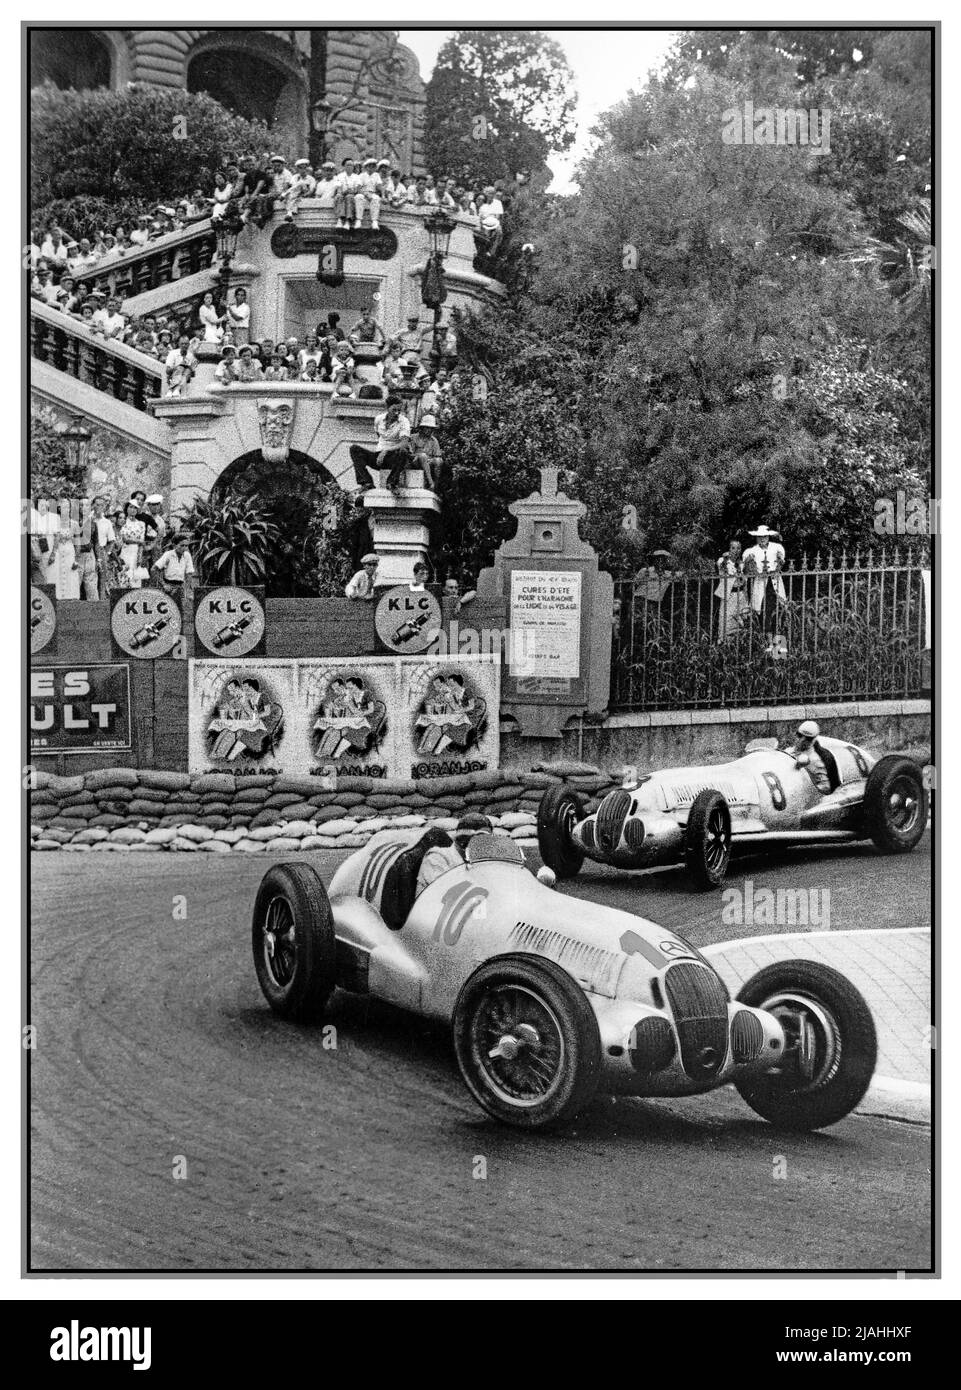 MONACO VINTAGE GRAND PRIX 1937 Mercedes 1 and 2 Manfred von Brauchitsch, winner, Rudy Caracciola 2nd 1937 Monaco GP, held that year on 8 August. Loews Hairpin. These Mercedes siver arrows were two laps in front of 3rd placed Christian Kautz in another Mercedes W125. Stock Photo